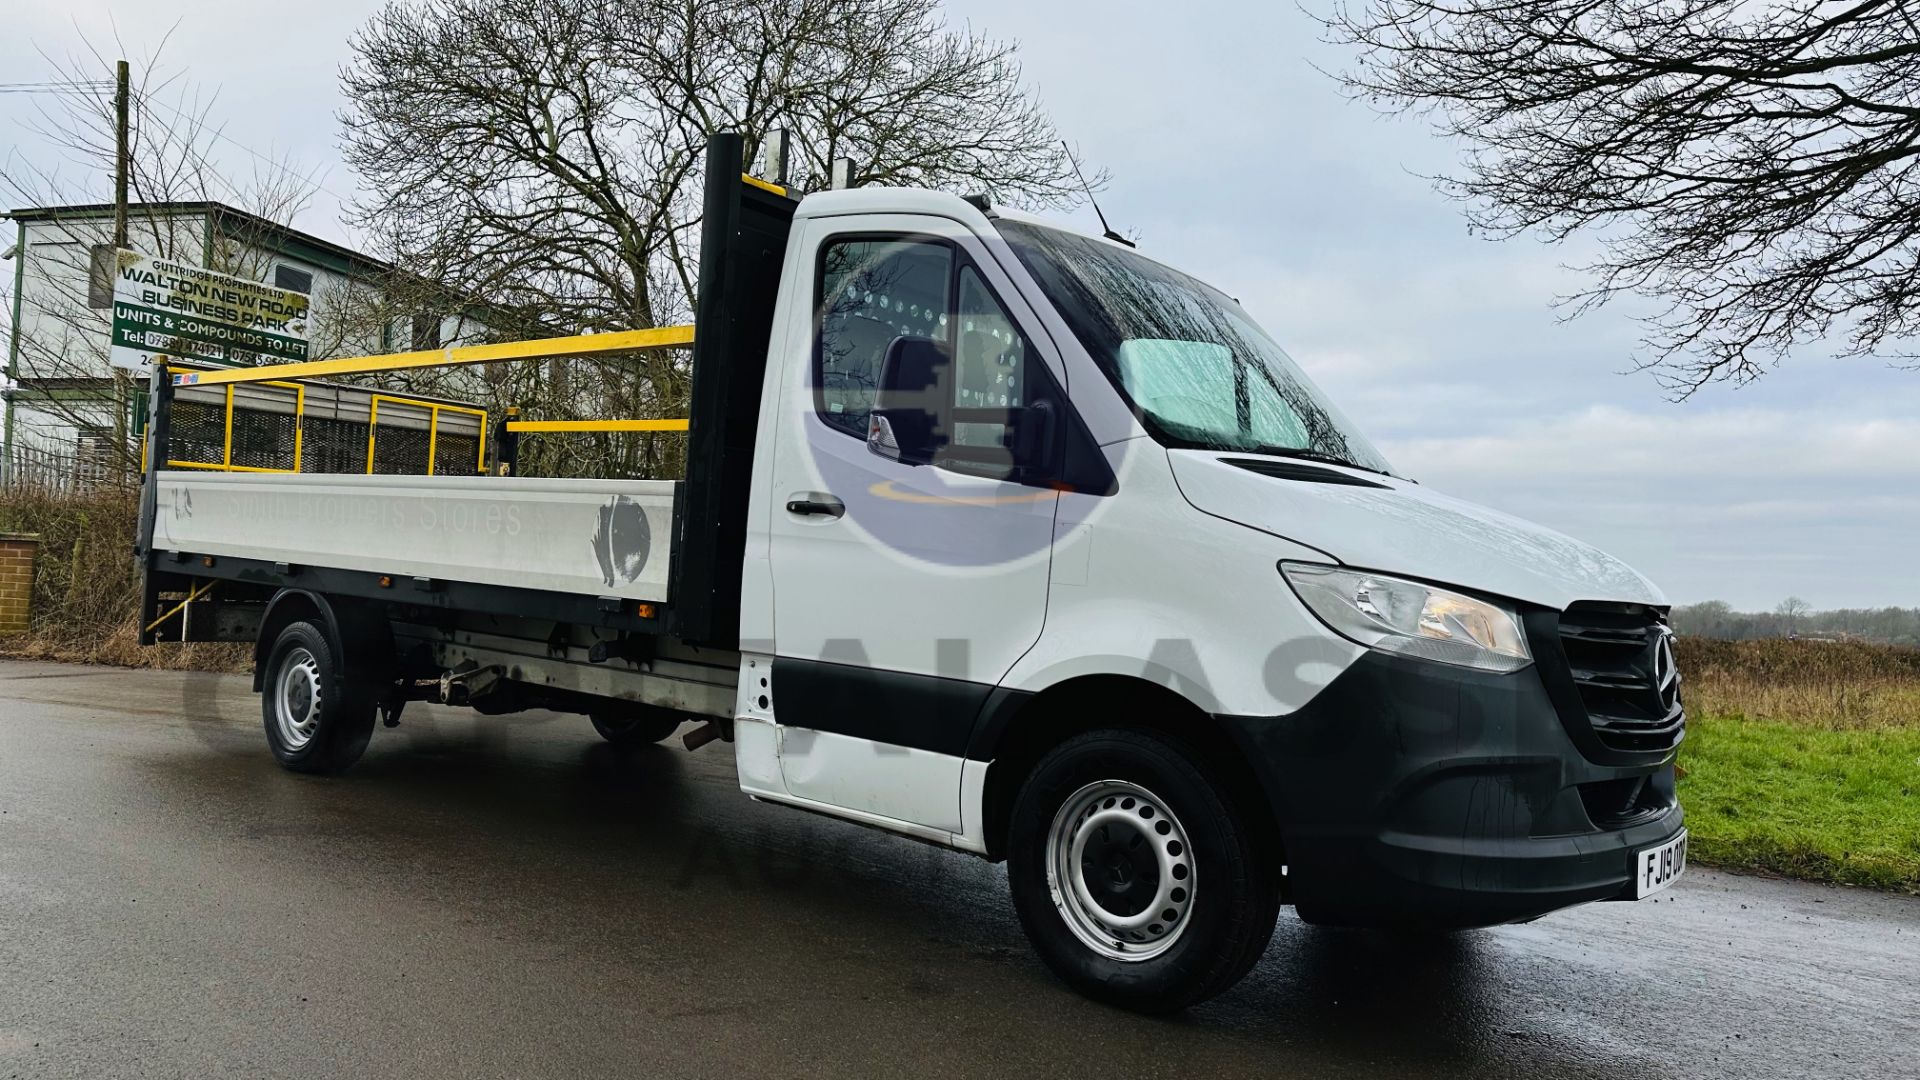 MERCEDES-BENZ SPRINTER 314 CDI *LWB - DROPSIDE* (2019 - EURO 6) AUTOMATIC *TAIL-LIFT* (3500 KG) - Image 3 of 40